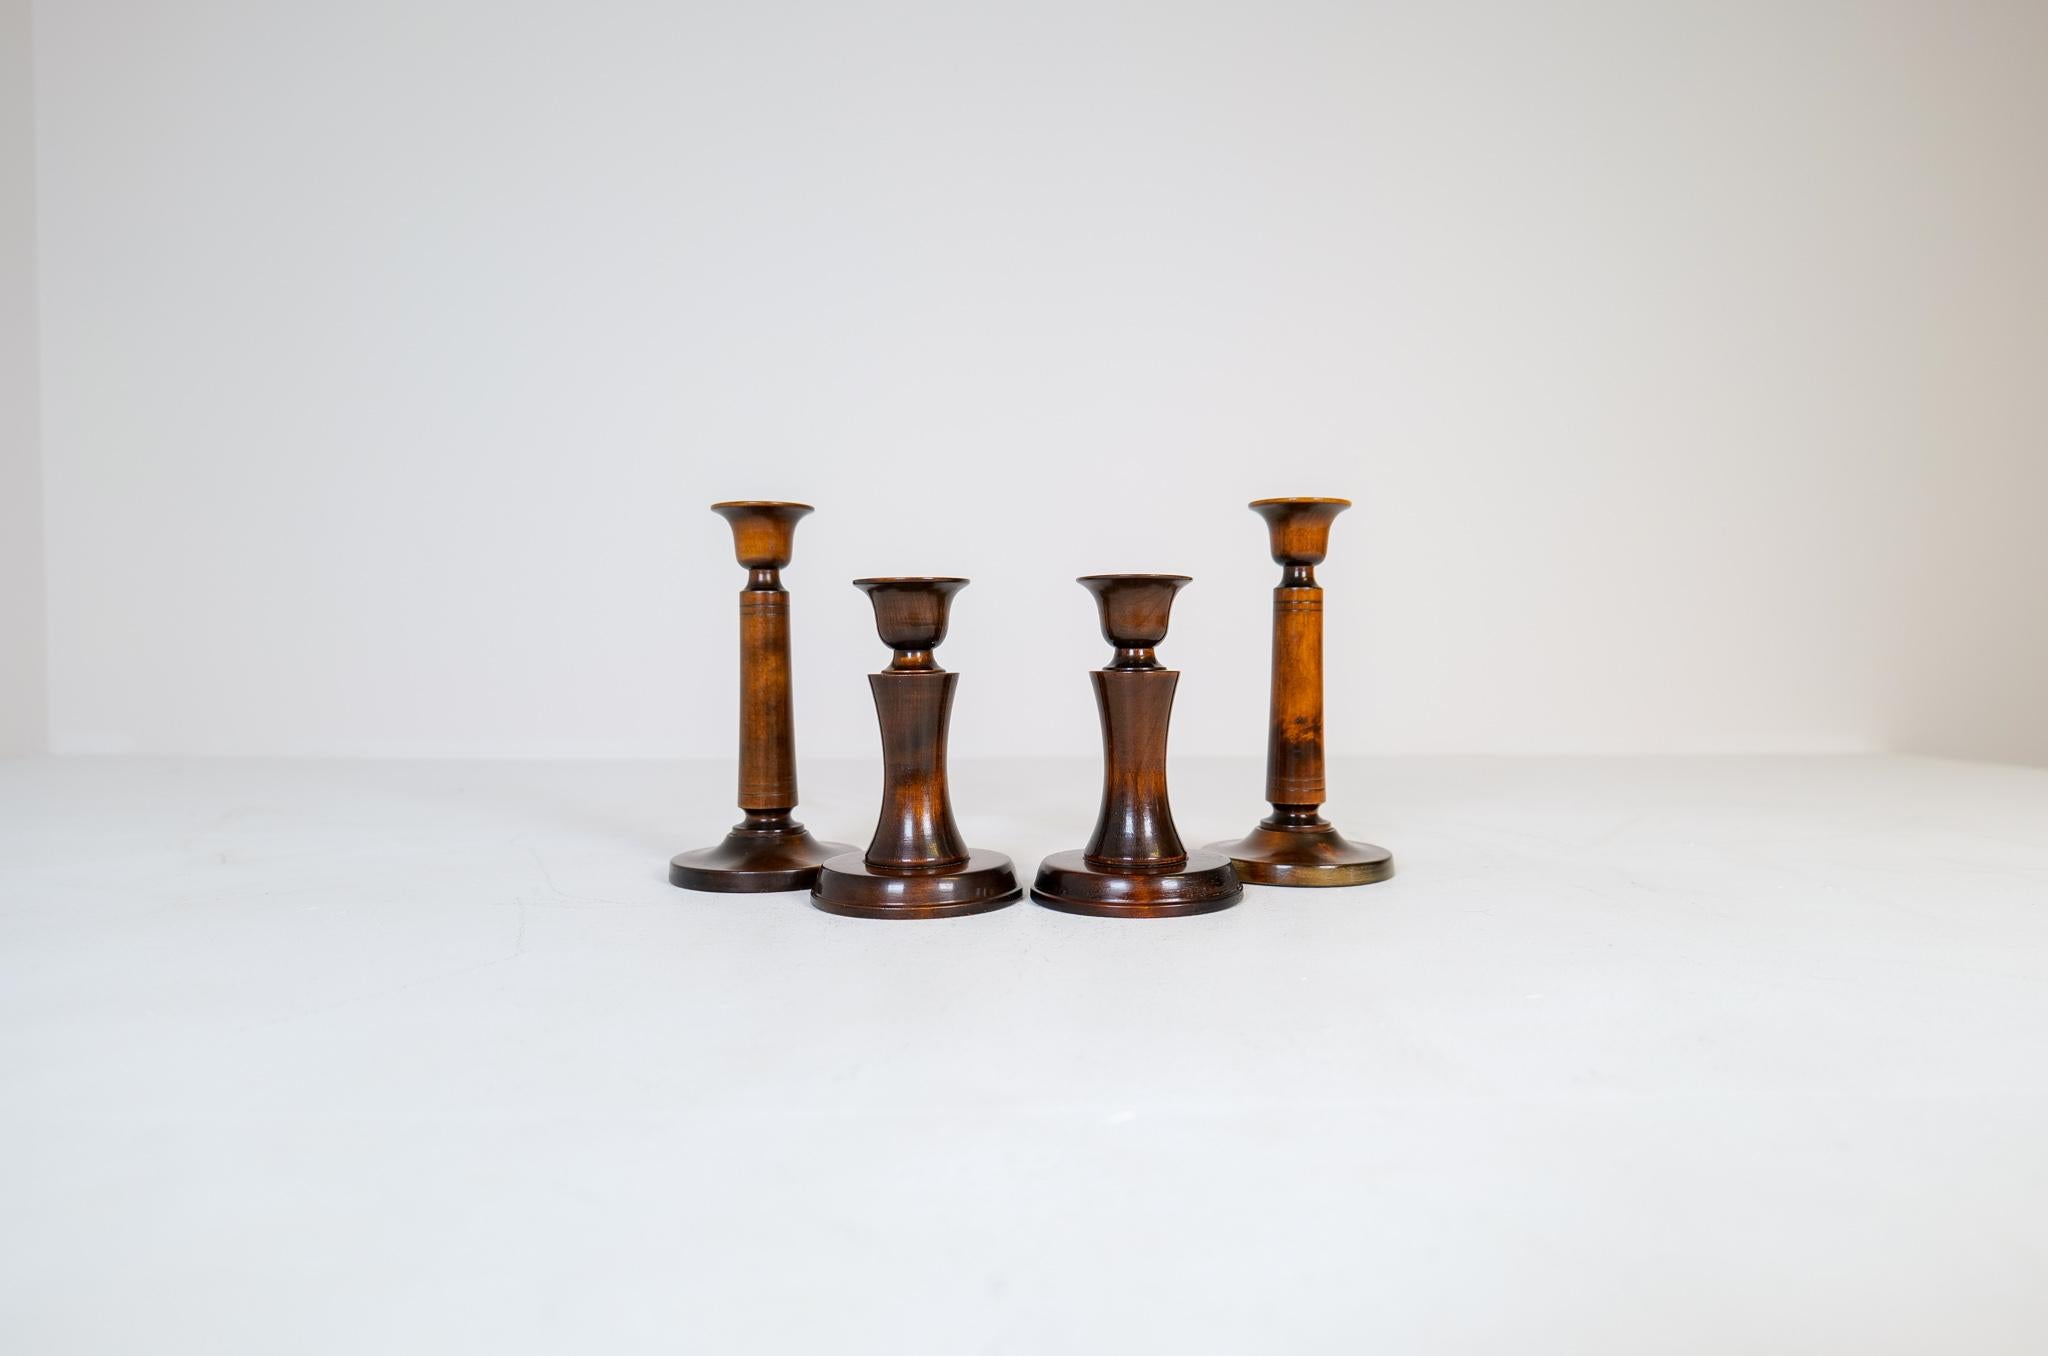 Set containing 4 candlesticks designed by the famous Carlm Malmsten. Made in lacquered birch are these modest yet highly crafted candlesticks made in Sweden during the 1960s. 

Good vintage condition, lacquer has some wear. 

Dimensions: Height